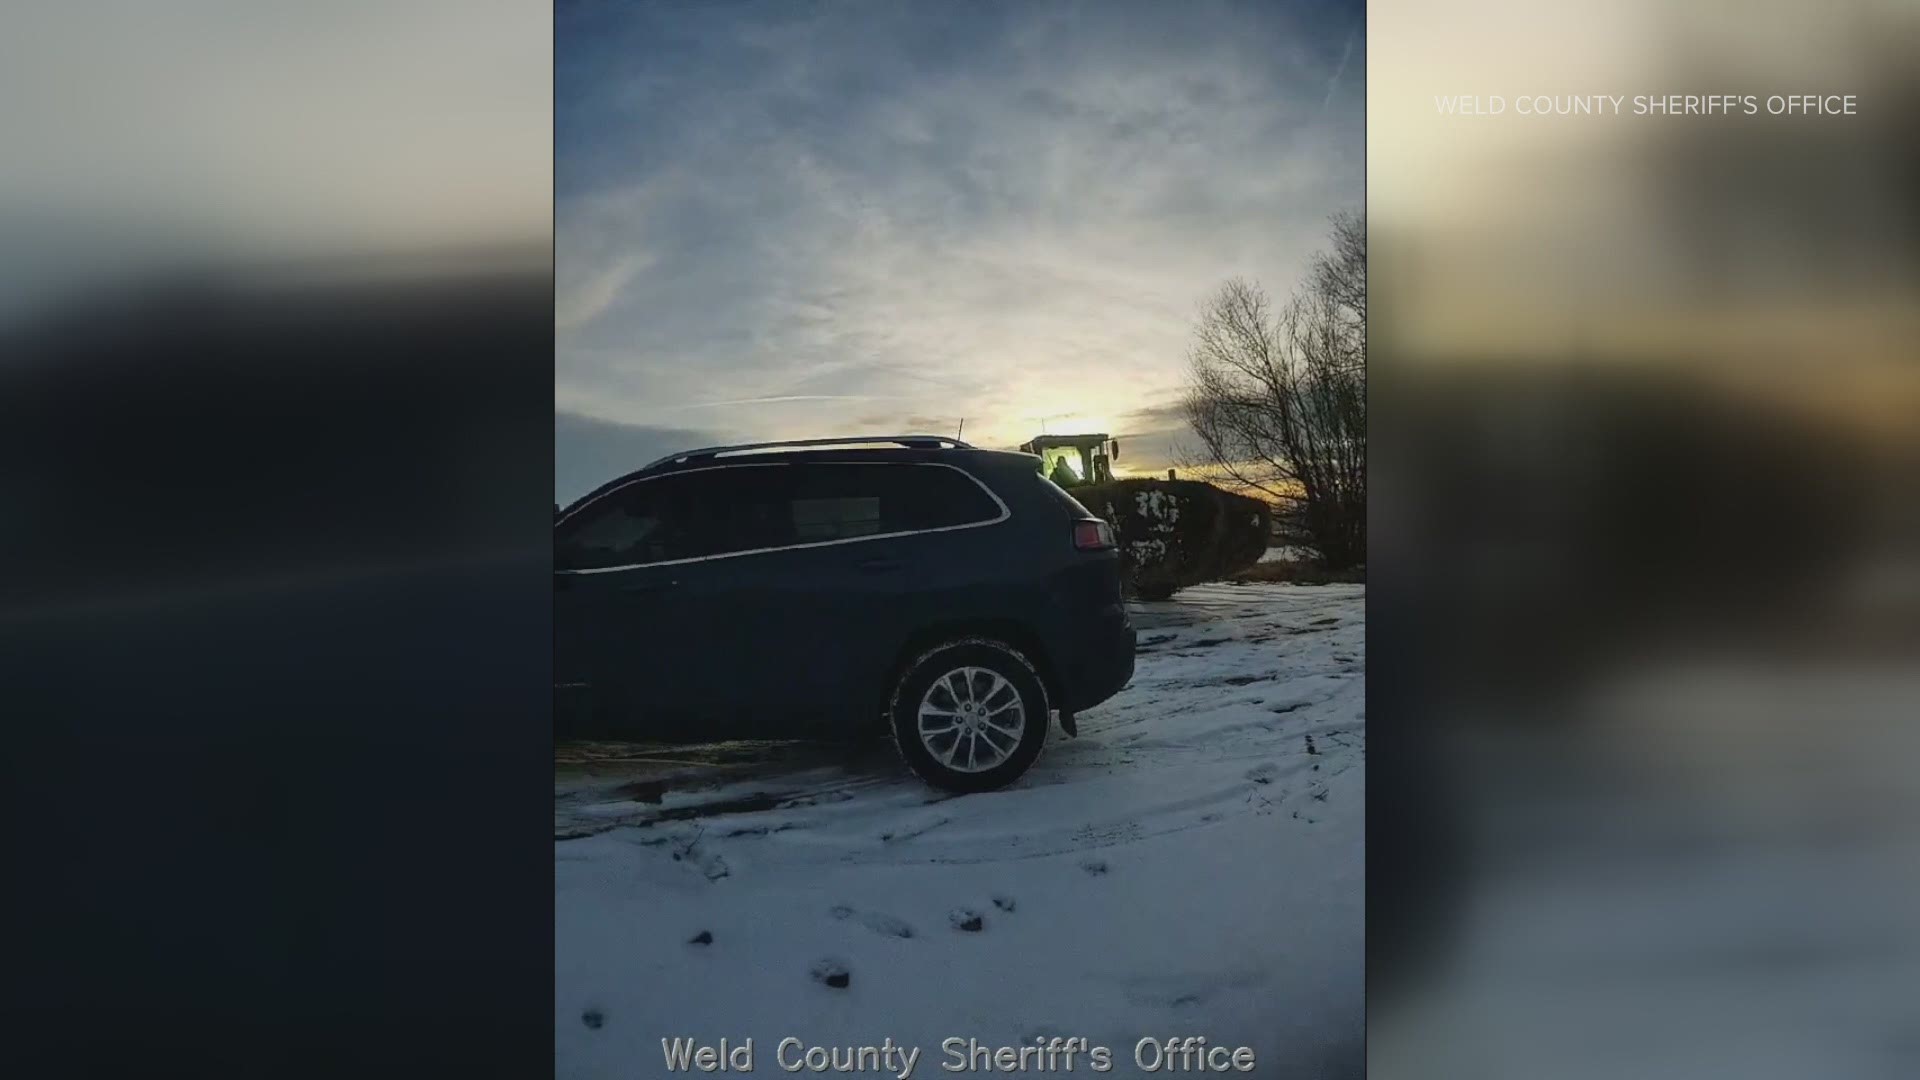 A Weld County man has been arrested and faces charges after he rammed a deputy's car with a front loader, the Weld County Sheriff's Office (WCSO) said.